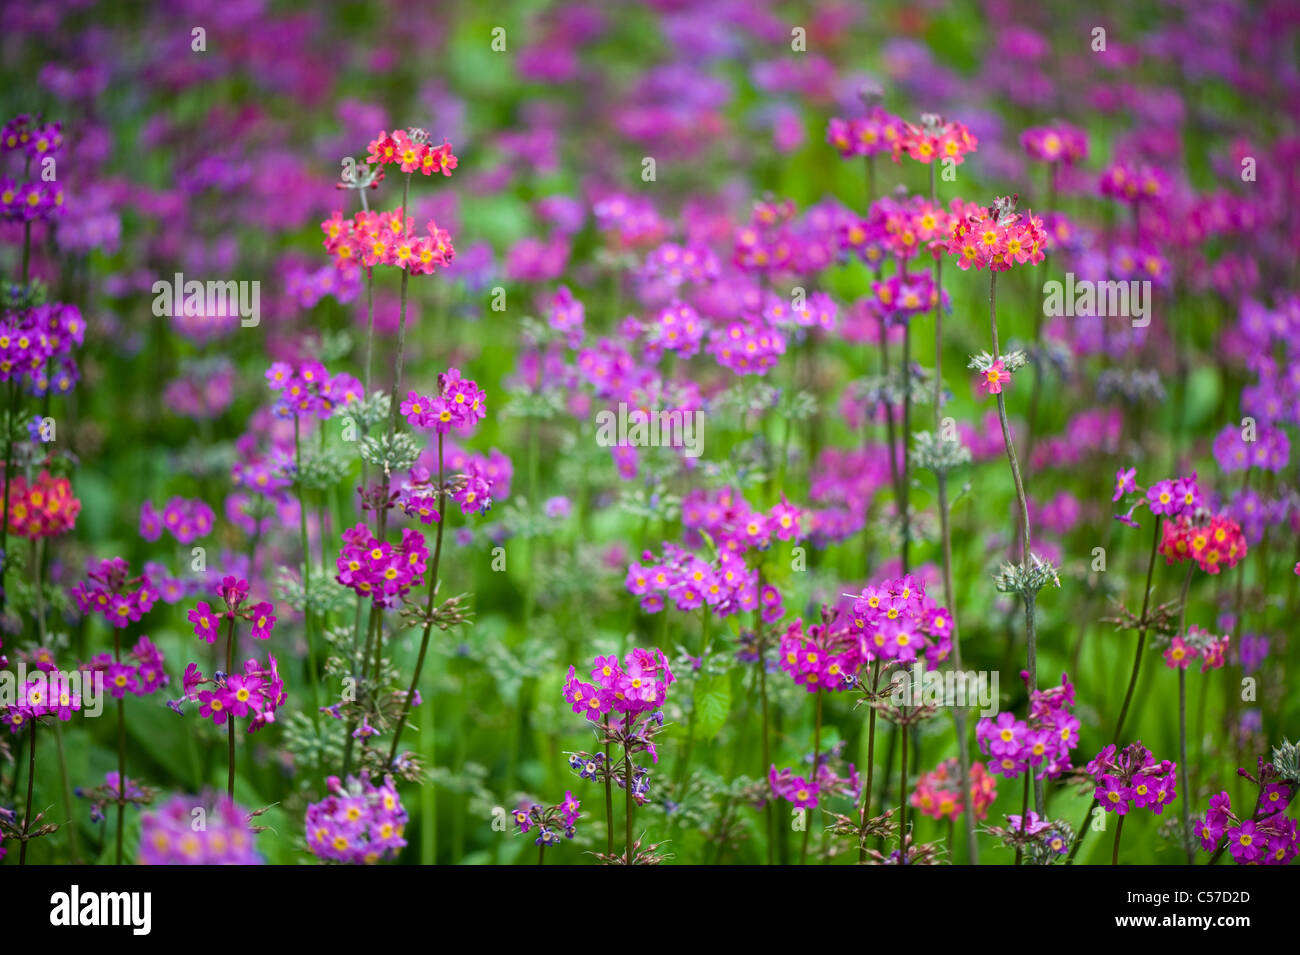 Close-up image of the colourful spring flowering Candelabra Primroses - Primula Bulleesiana flowers a cottage garden plant. Stock Photo